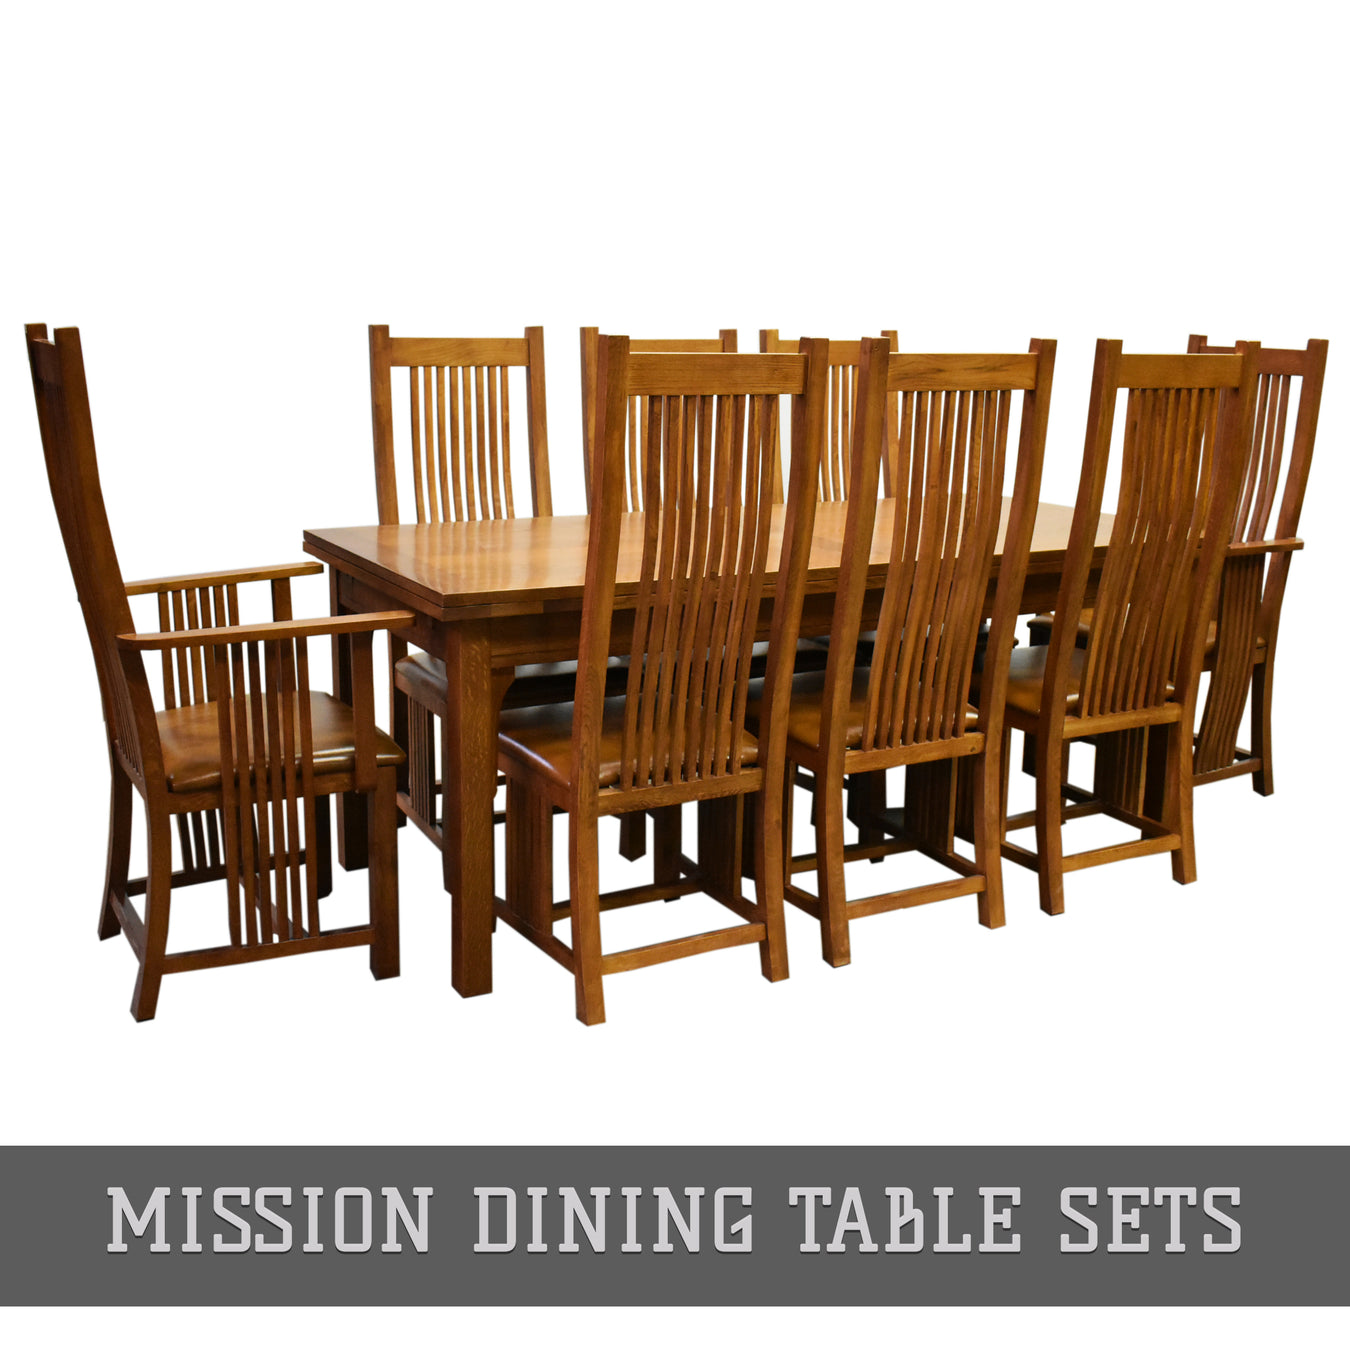 Mission Dining Table Sets